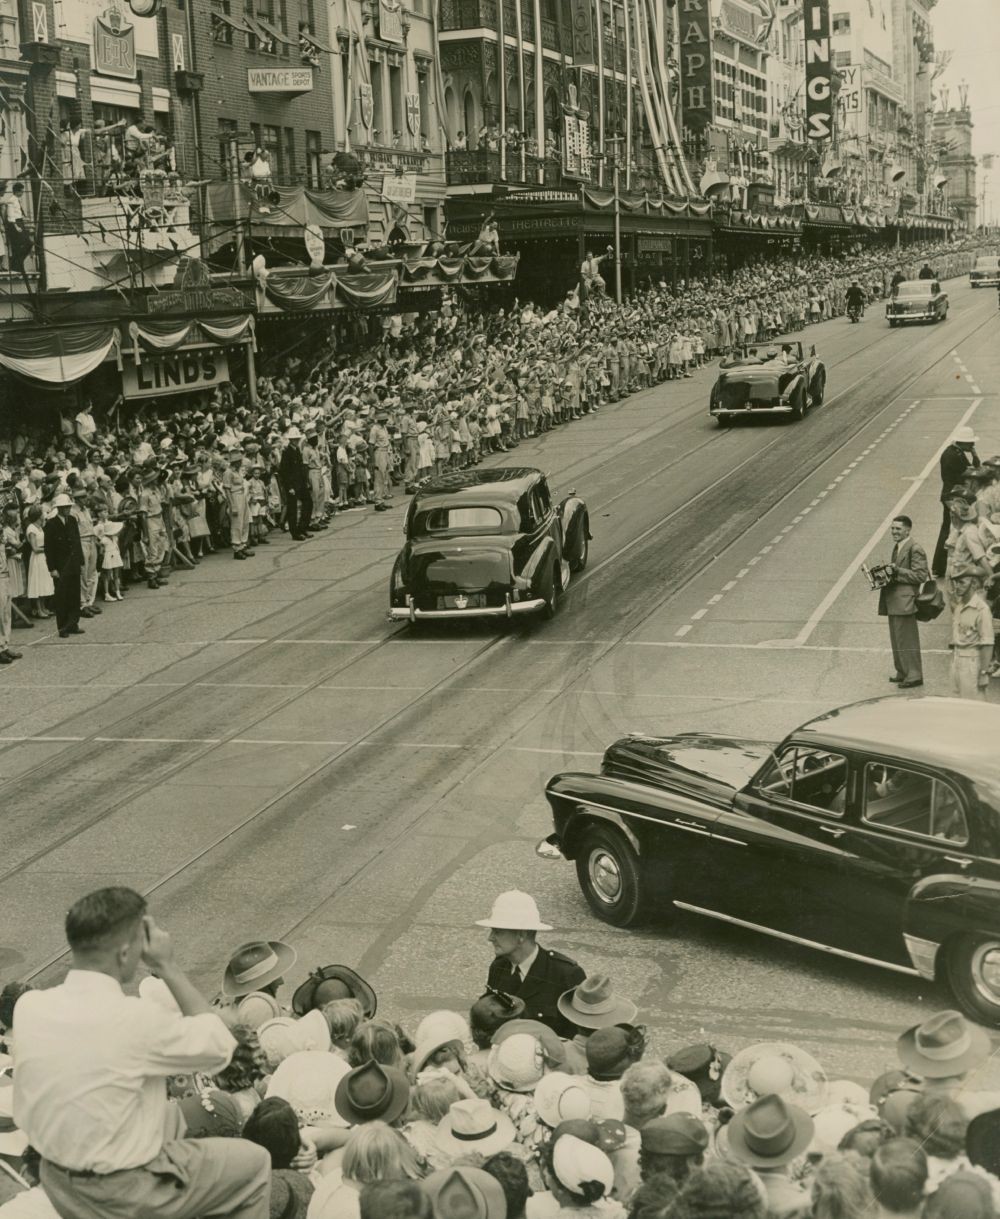 Large crowds line the streets as the royal entourage drives past Queensland 1954